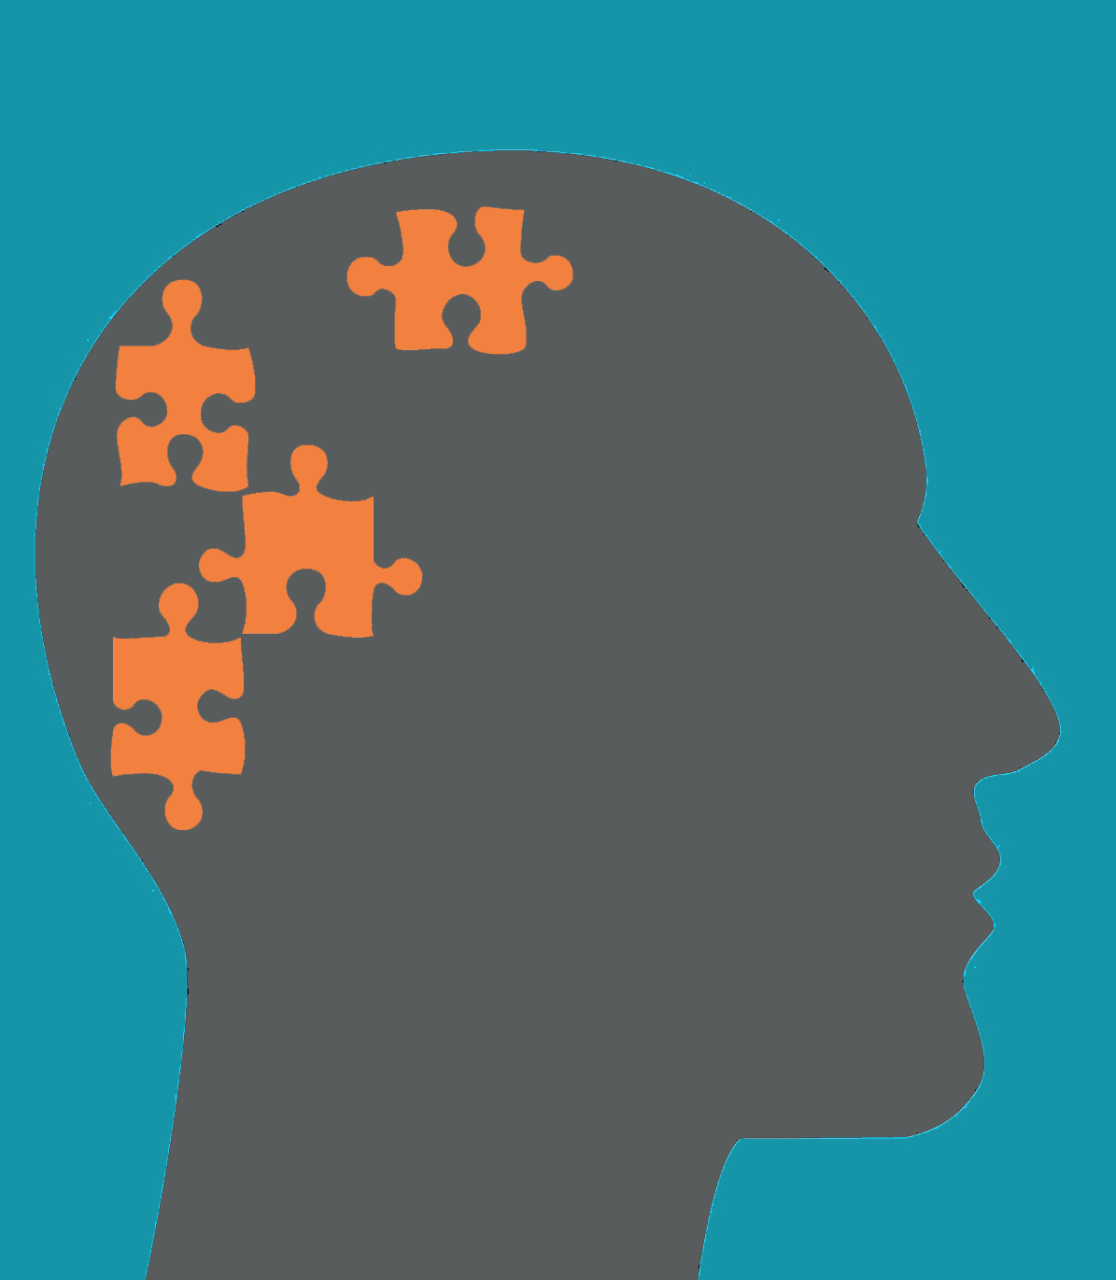 A graphic of a head with jigsaw pieces in it